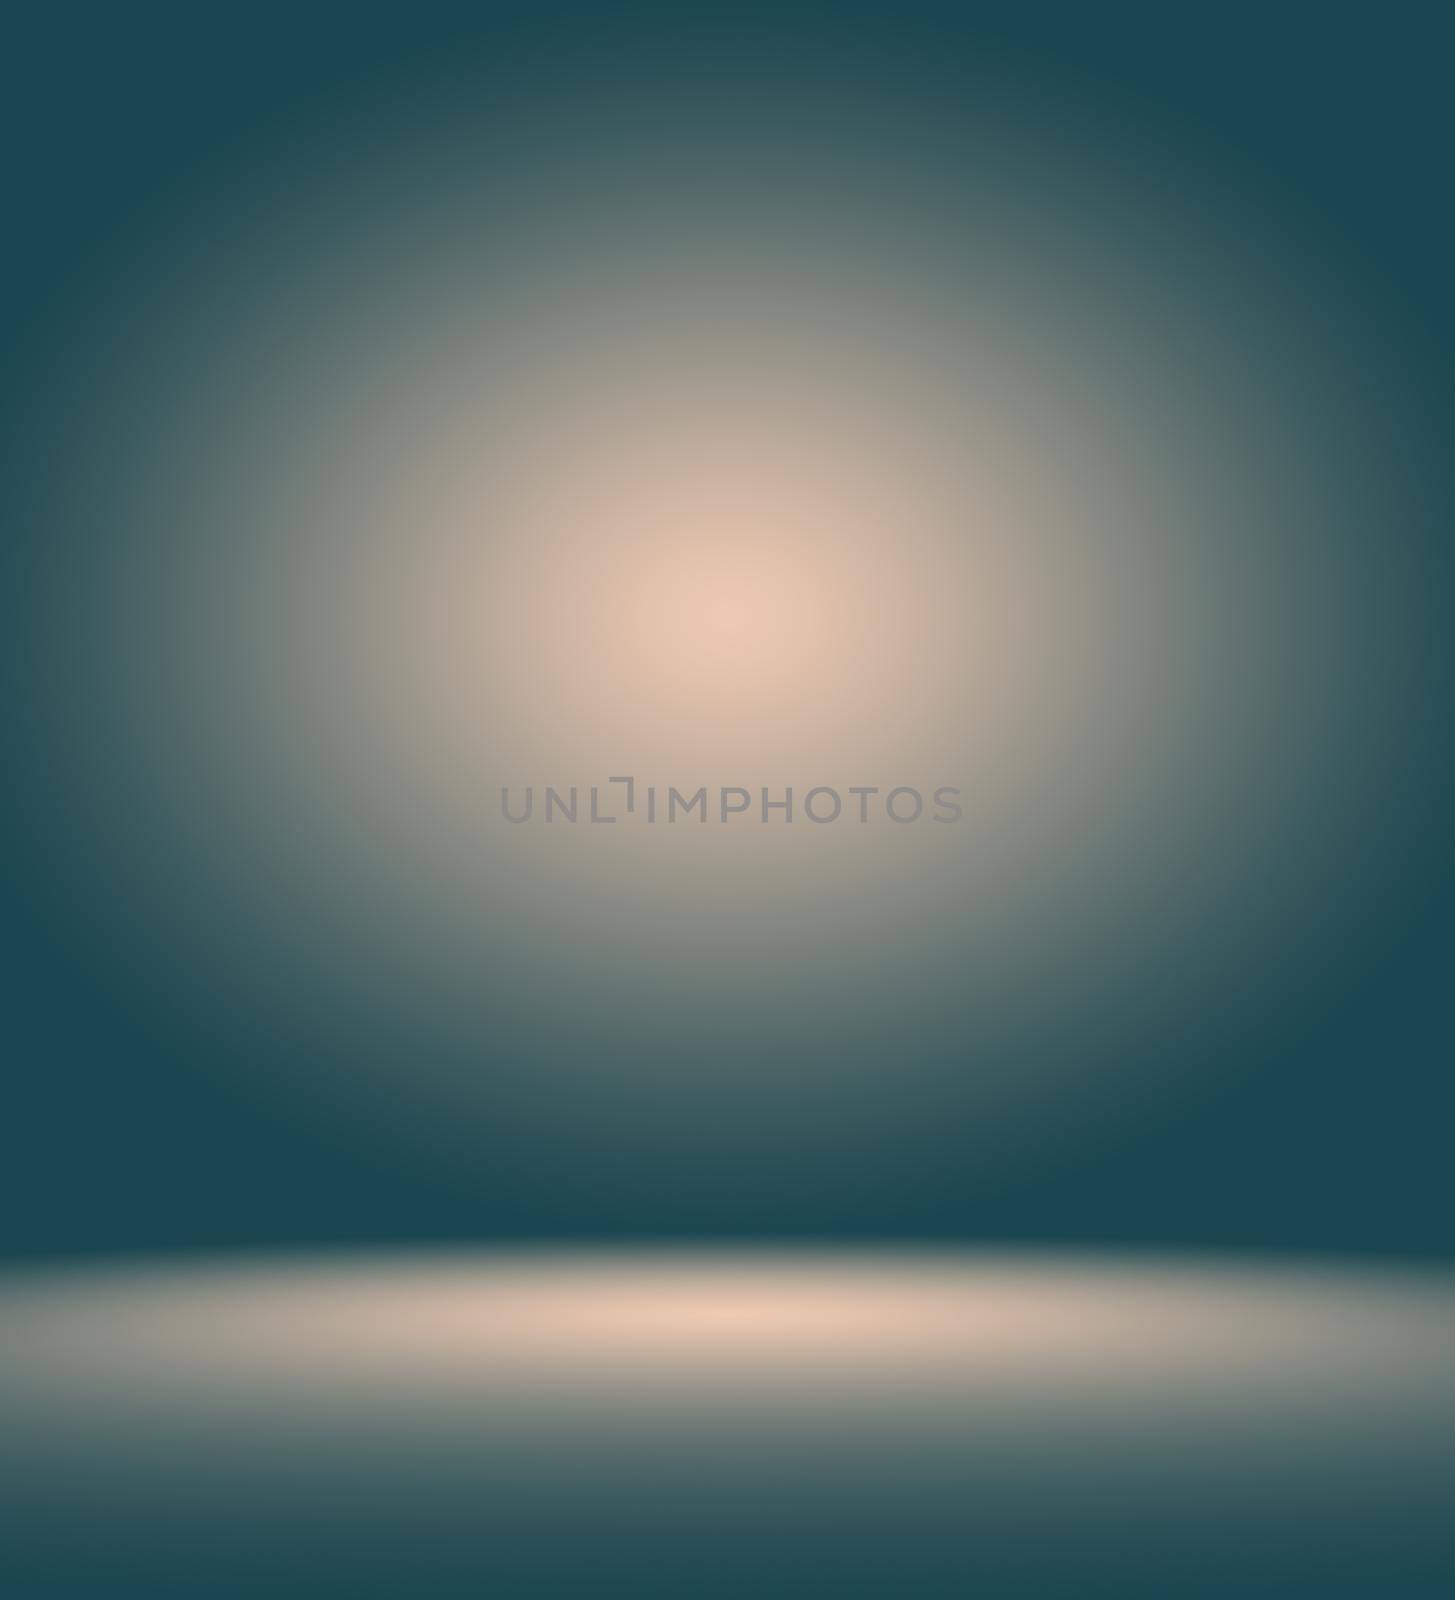 abstract dark blurred background, smooth gradient texture color, shiny bright website pattern, banner header or sidebar graphic art image.